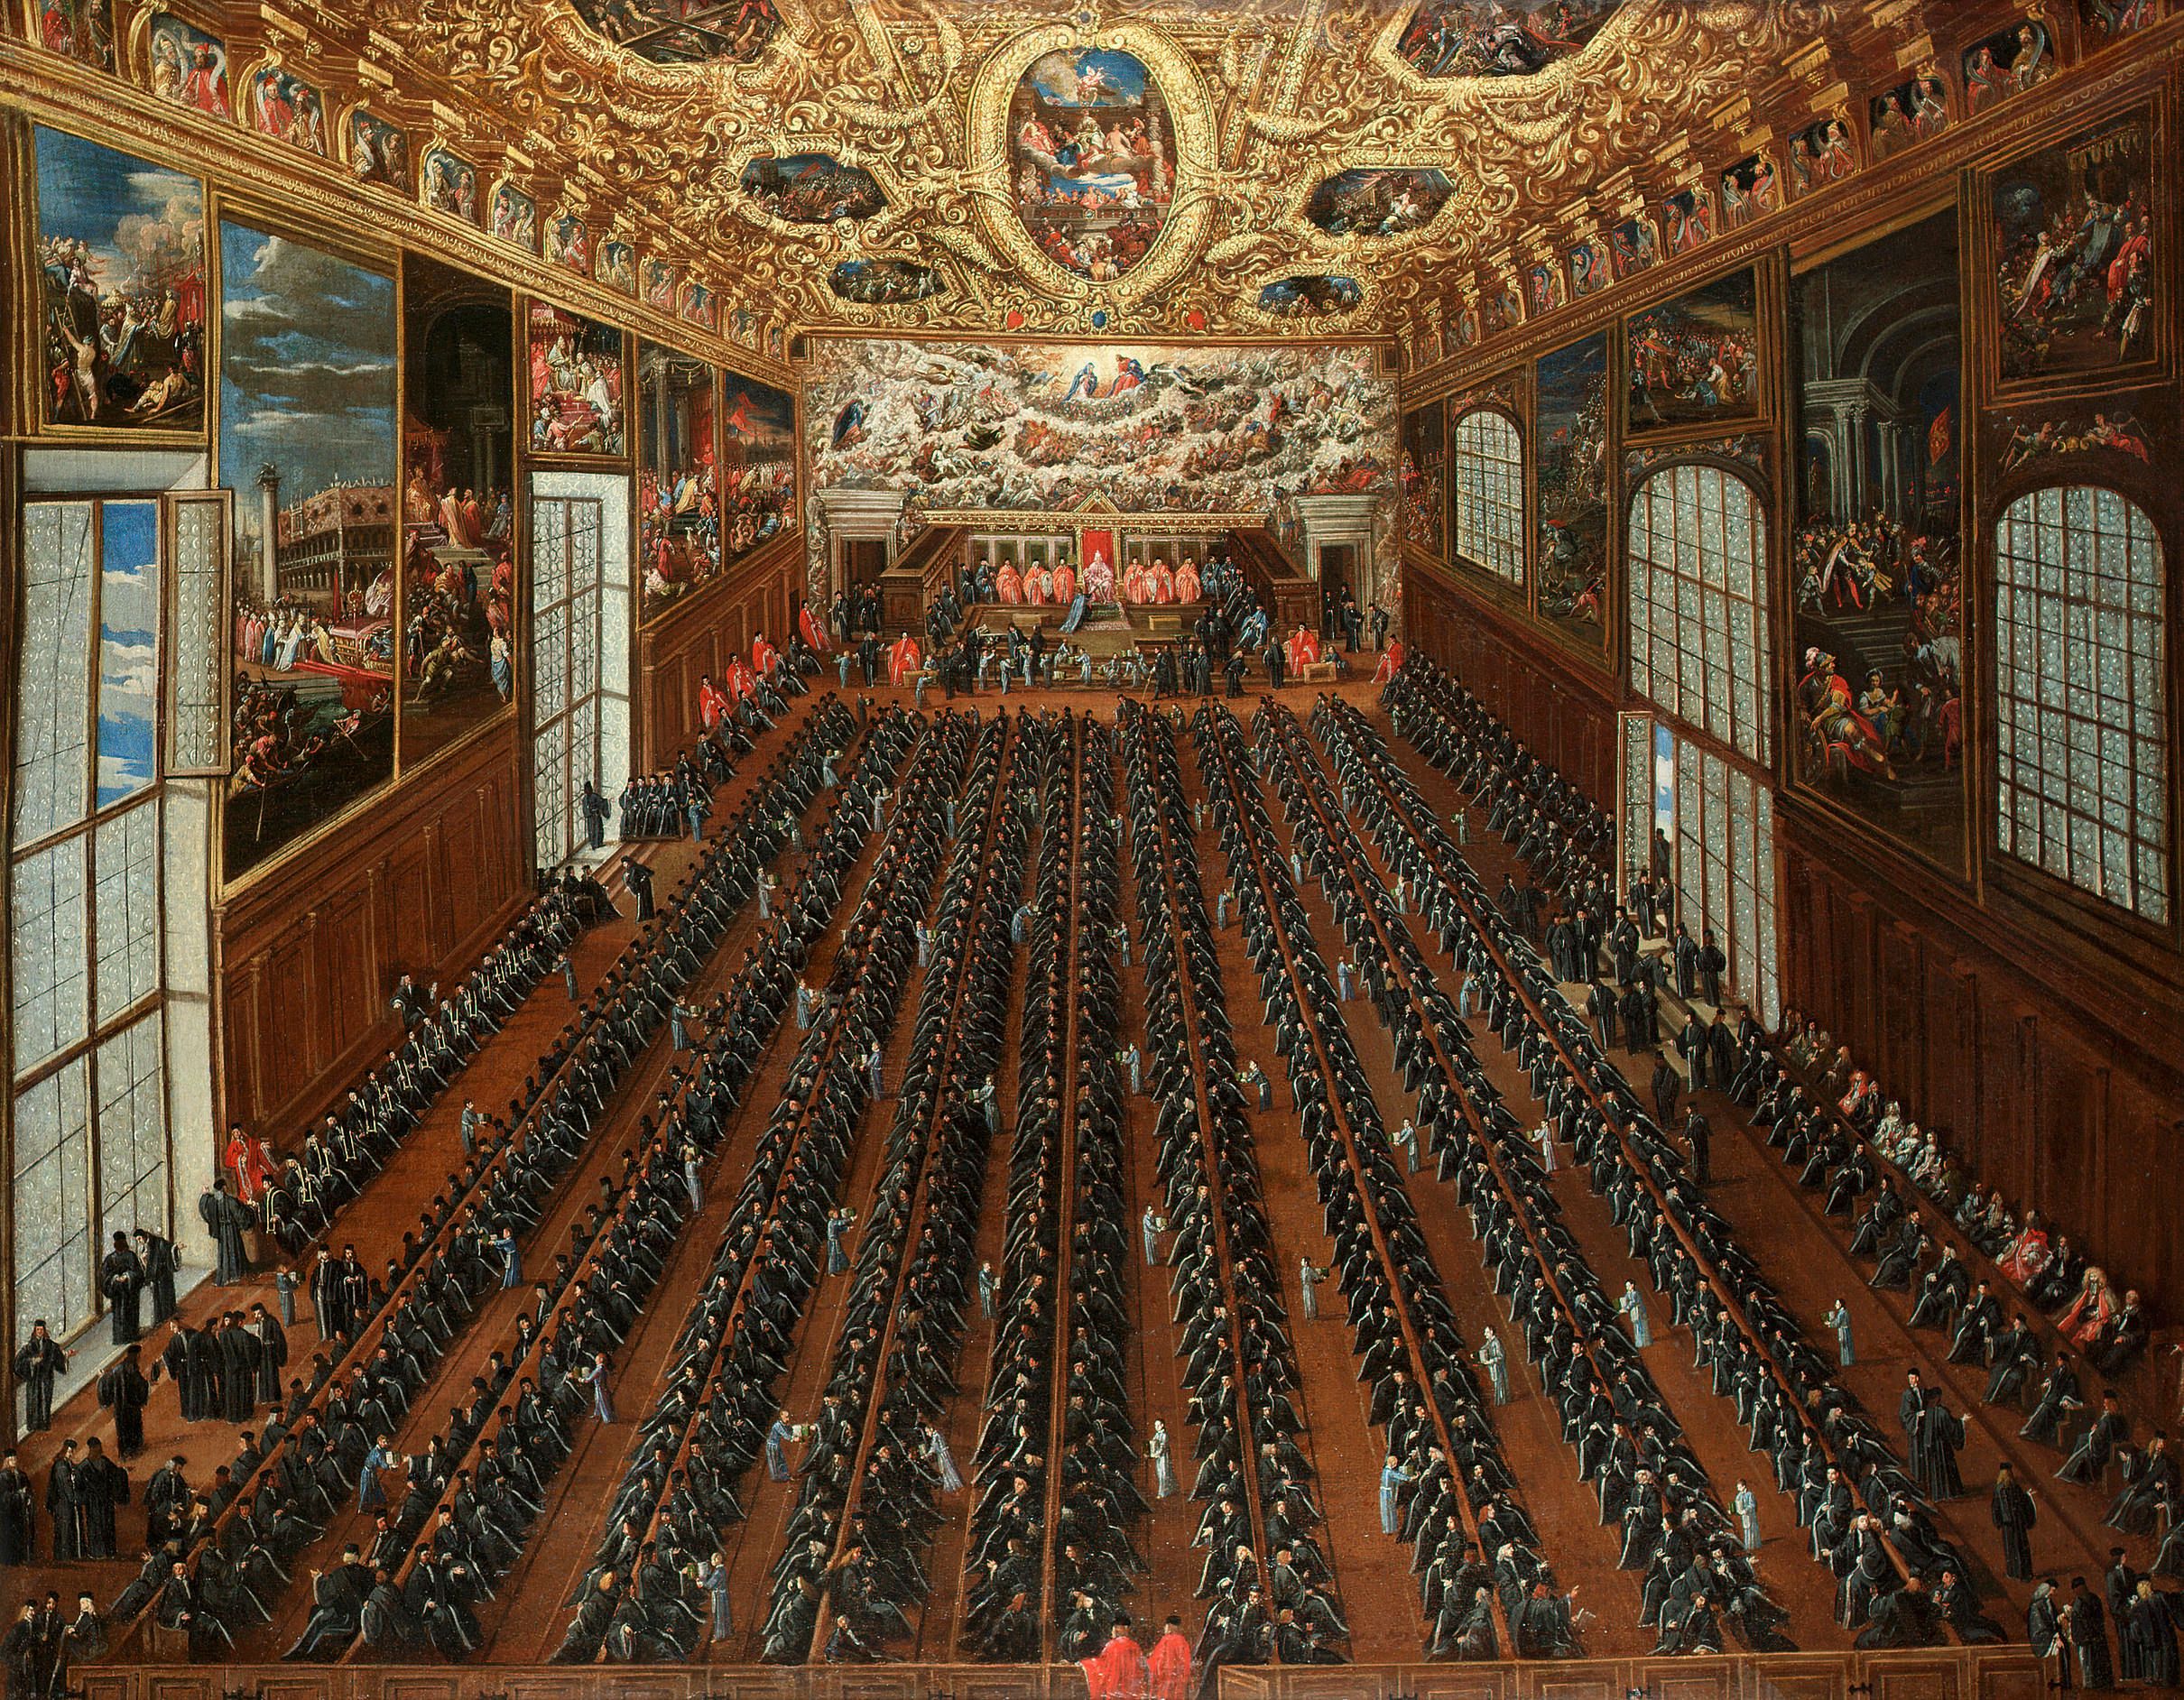 A painting of a large chamber with rows on rows of small black-robed figures on the floor below, an ornate gilt ceiling, and tall windows and doors surrounded by paintings and murals. Smaller gray-dressed figures move between the rows.